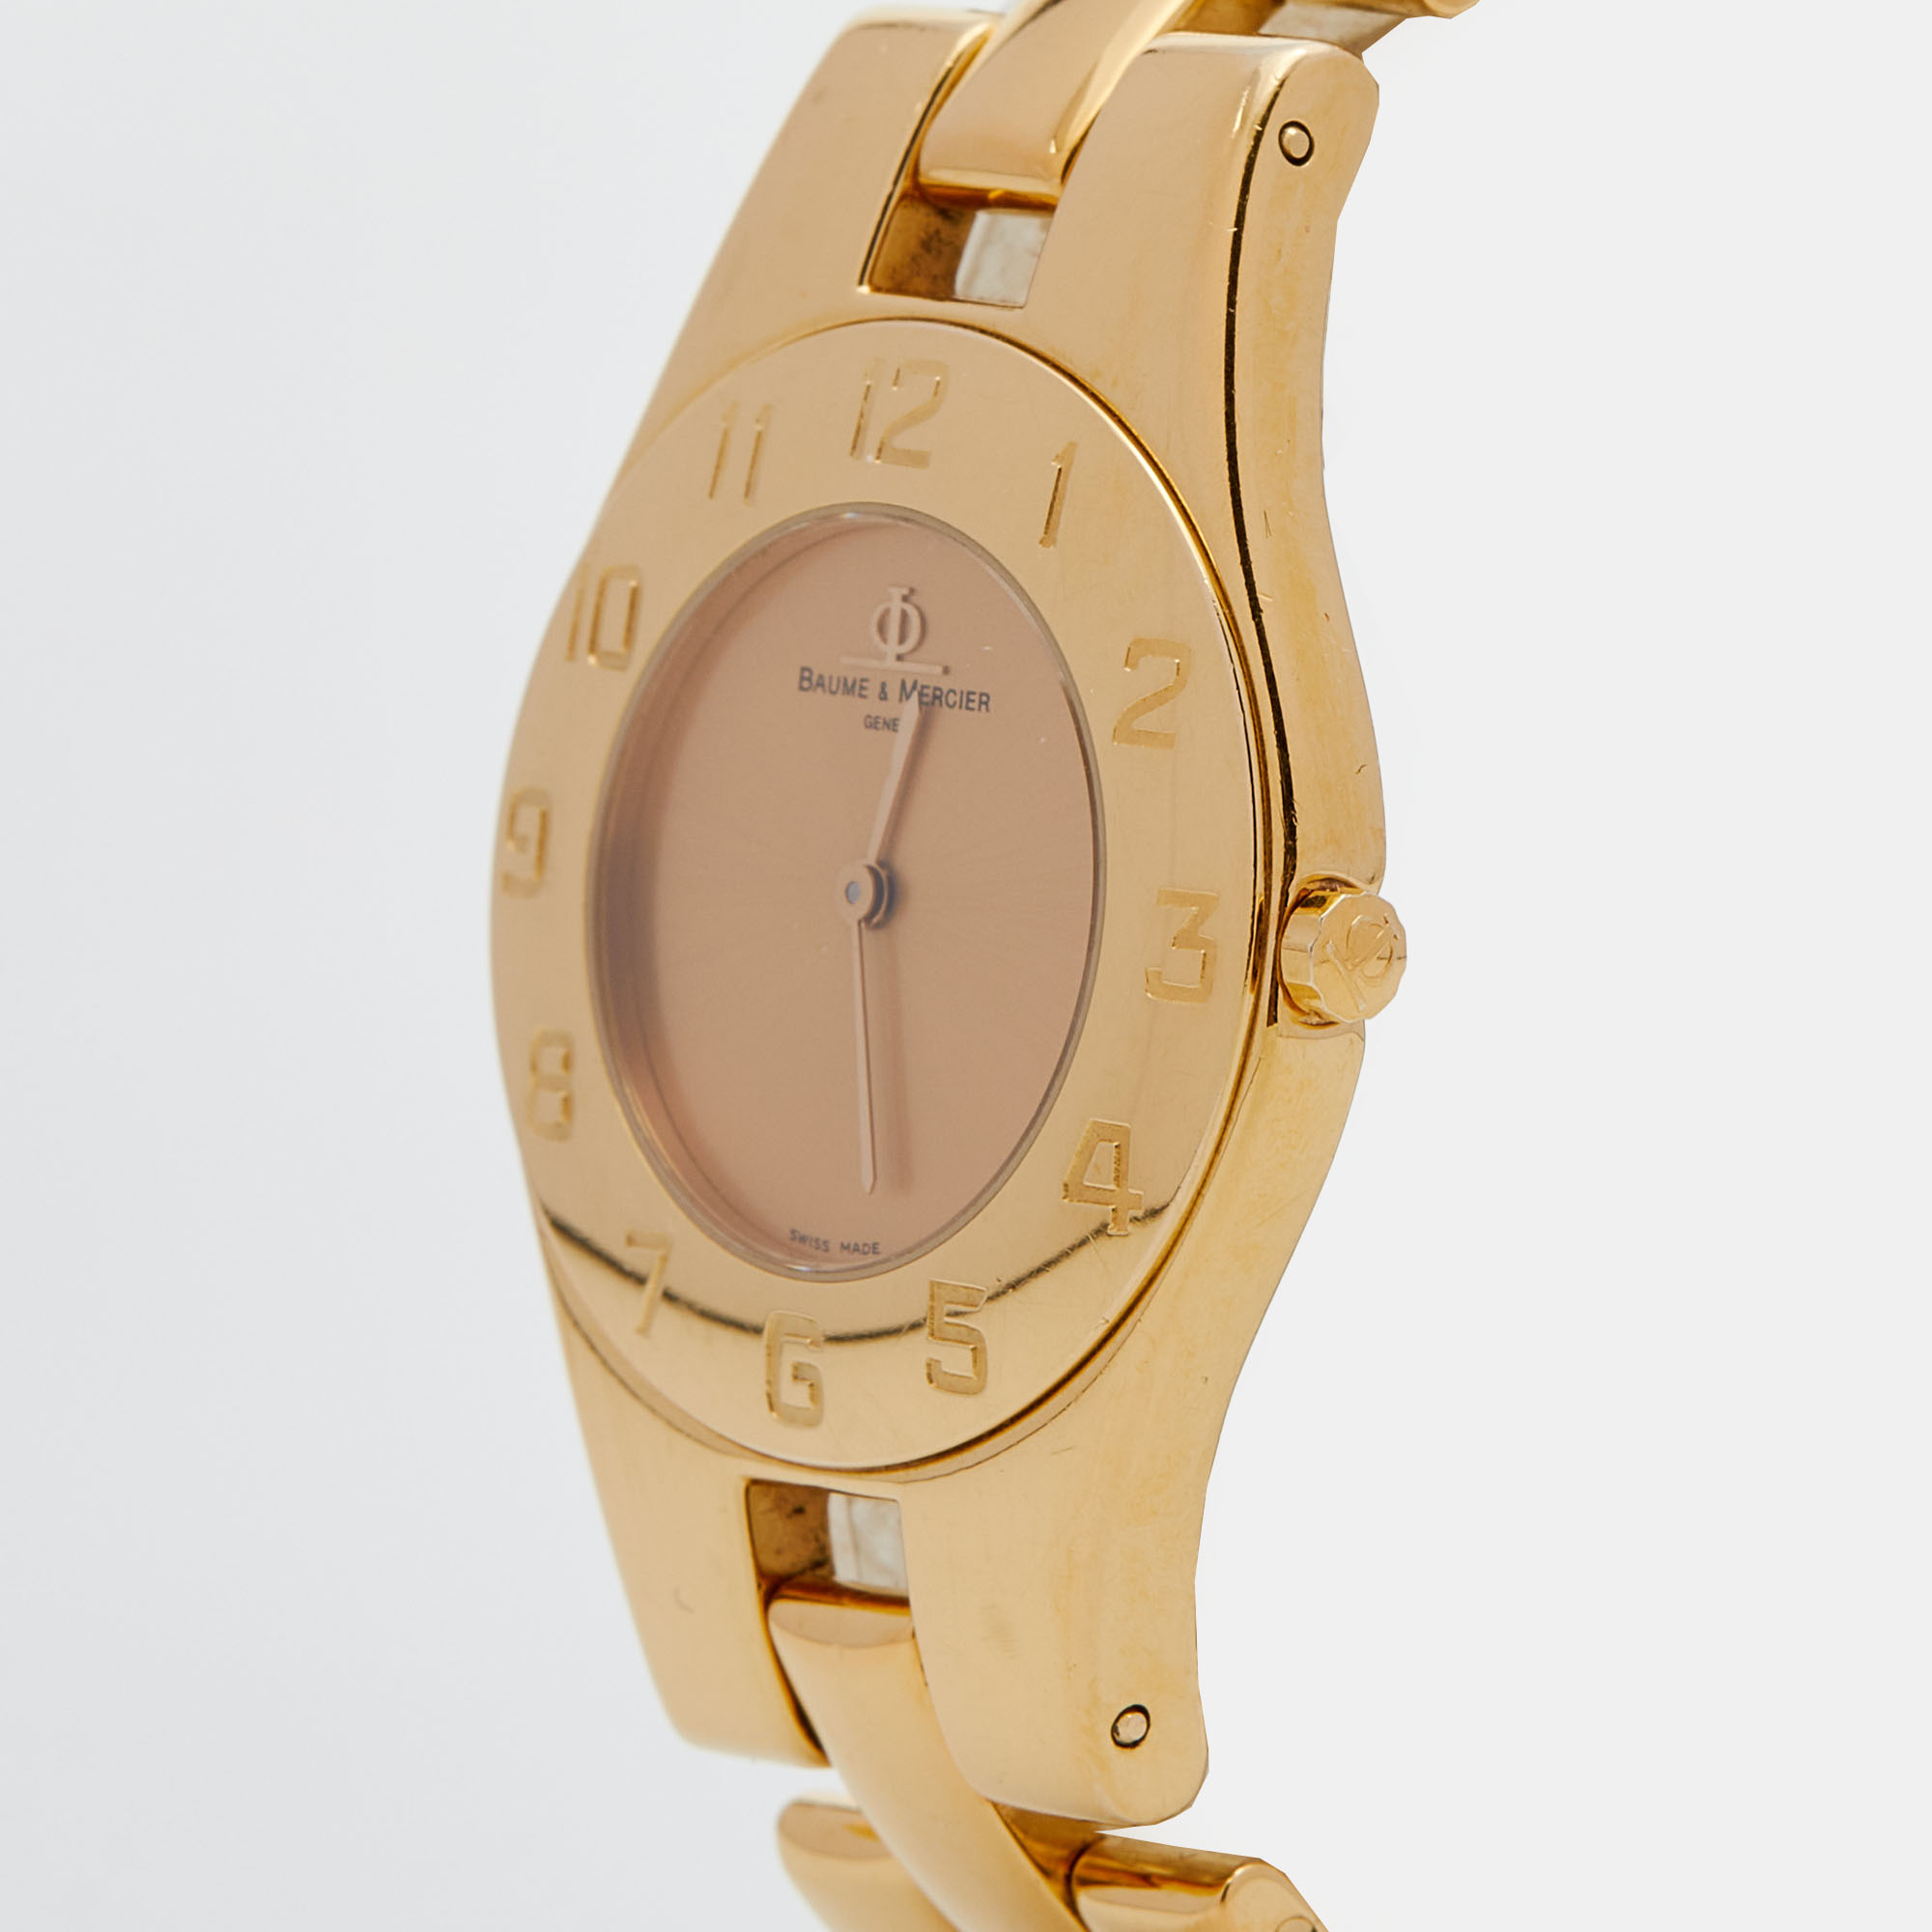 

Baume & Mercier Champagne Yellow Gold Plated Stainless Steel